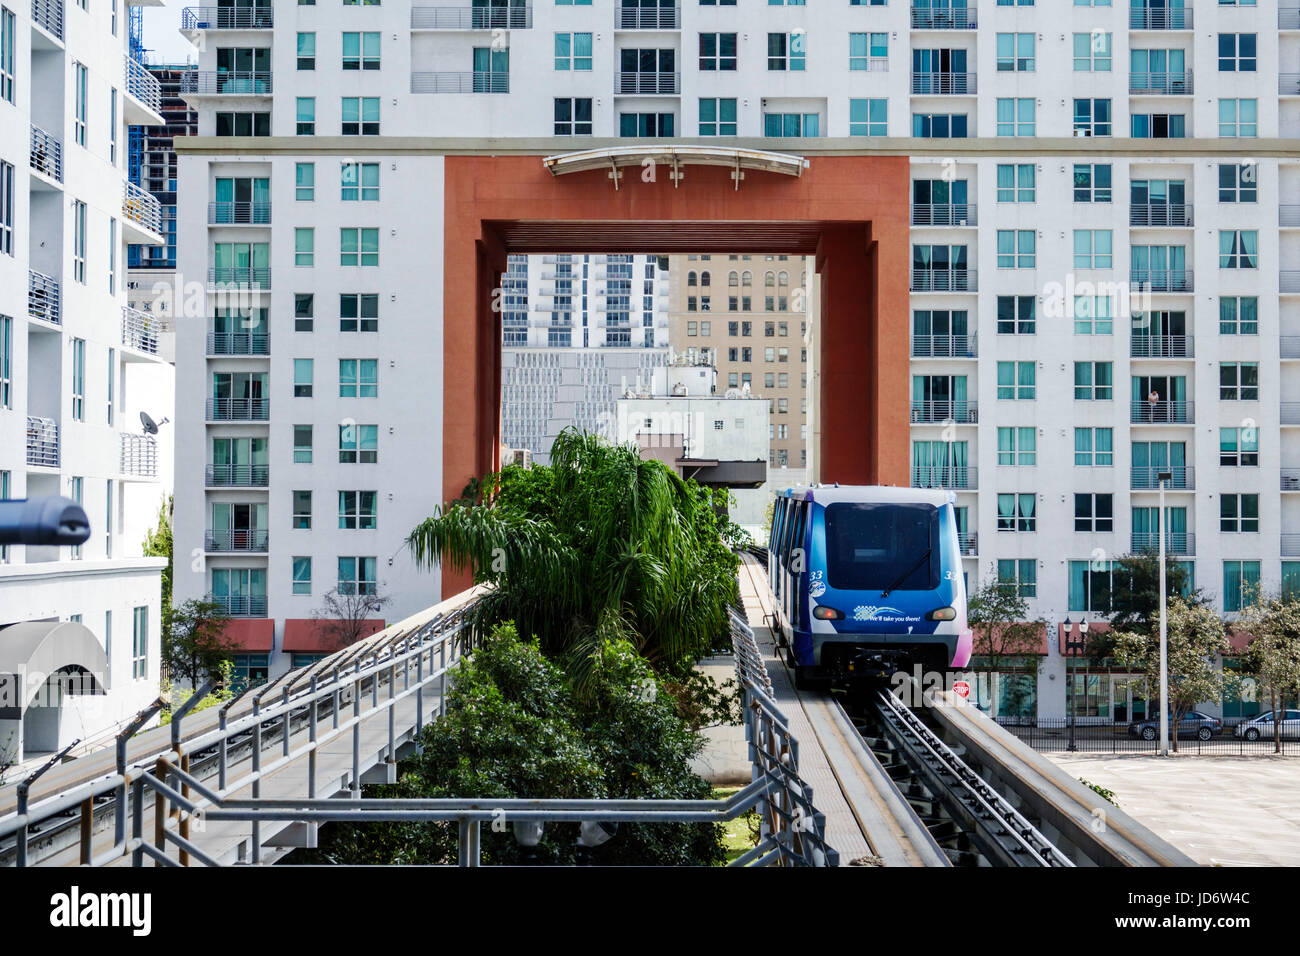 Miami Florida,downtown,Metromover,automated people mover system,train,track,building,tunnel,FL170331216 Stock Photo